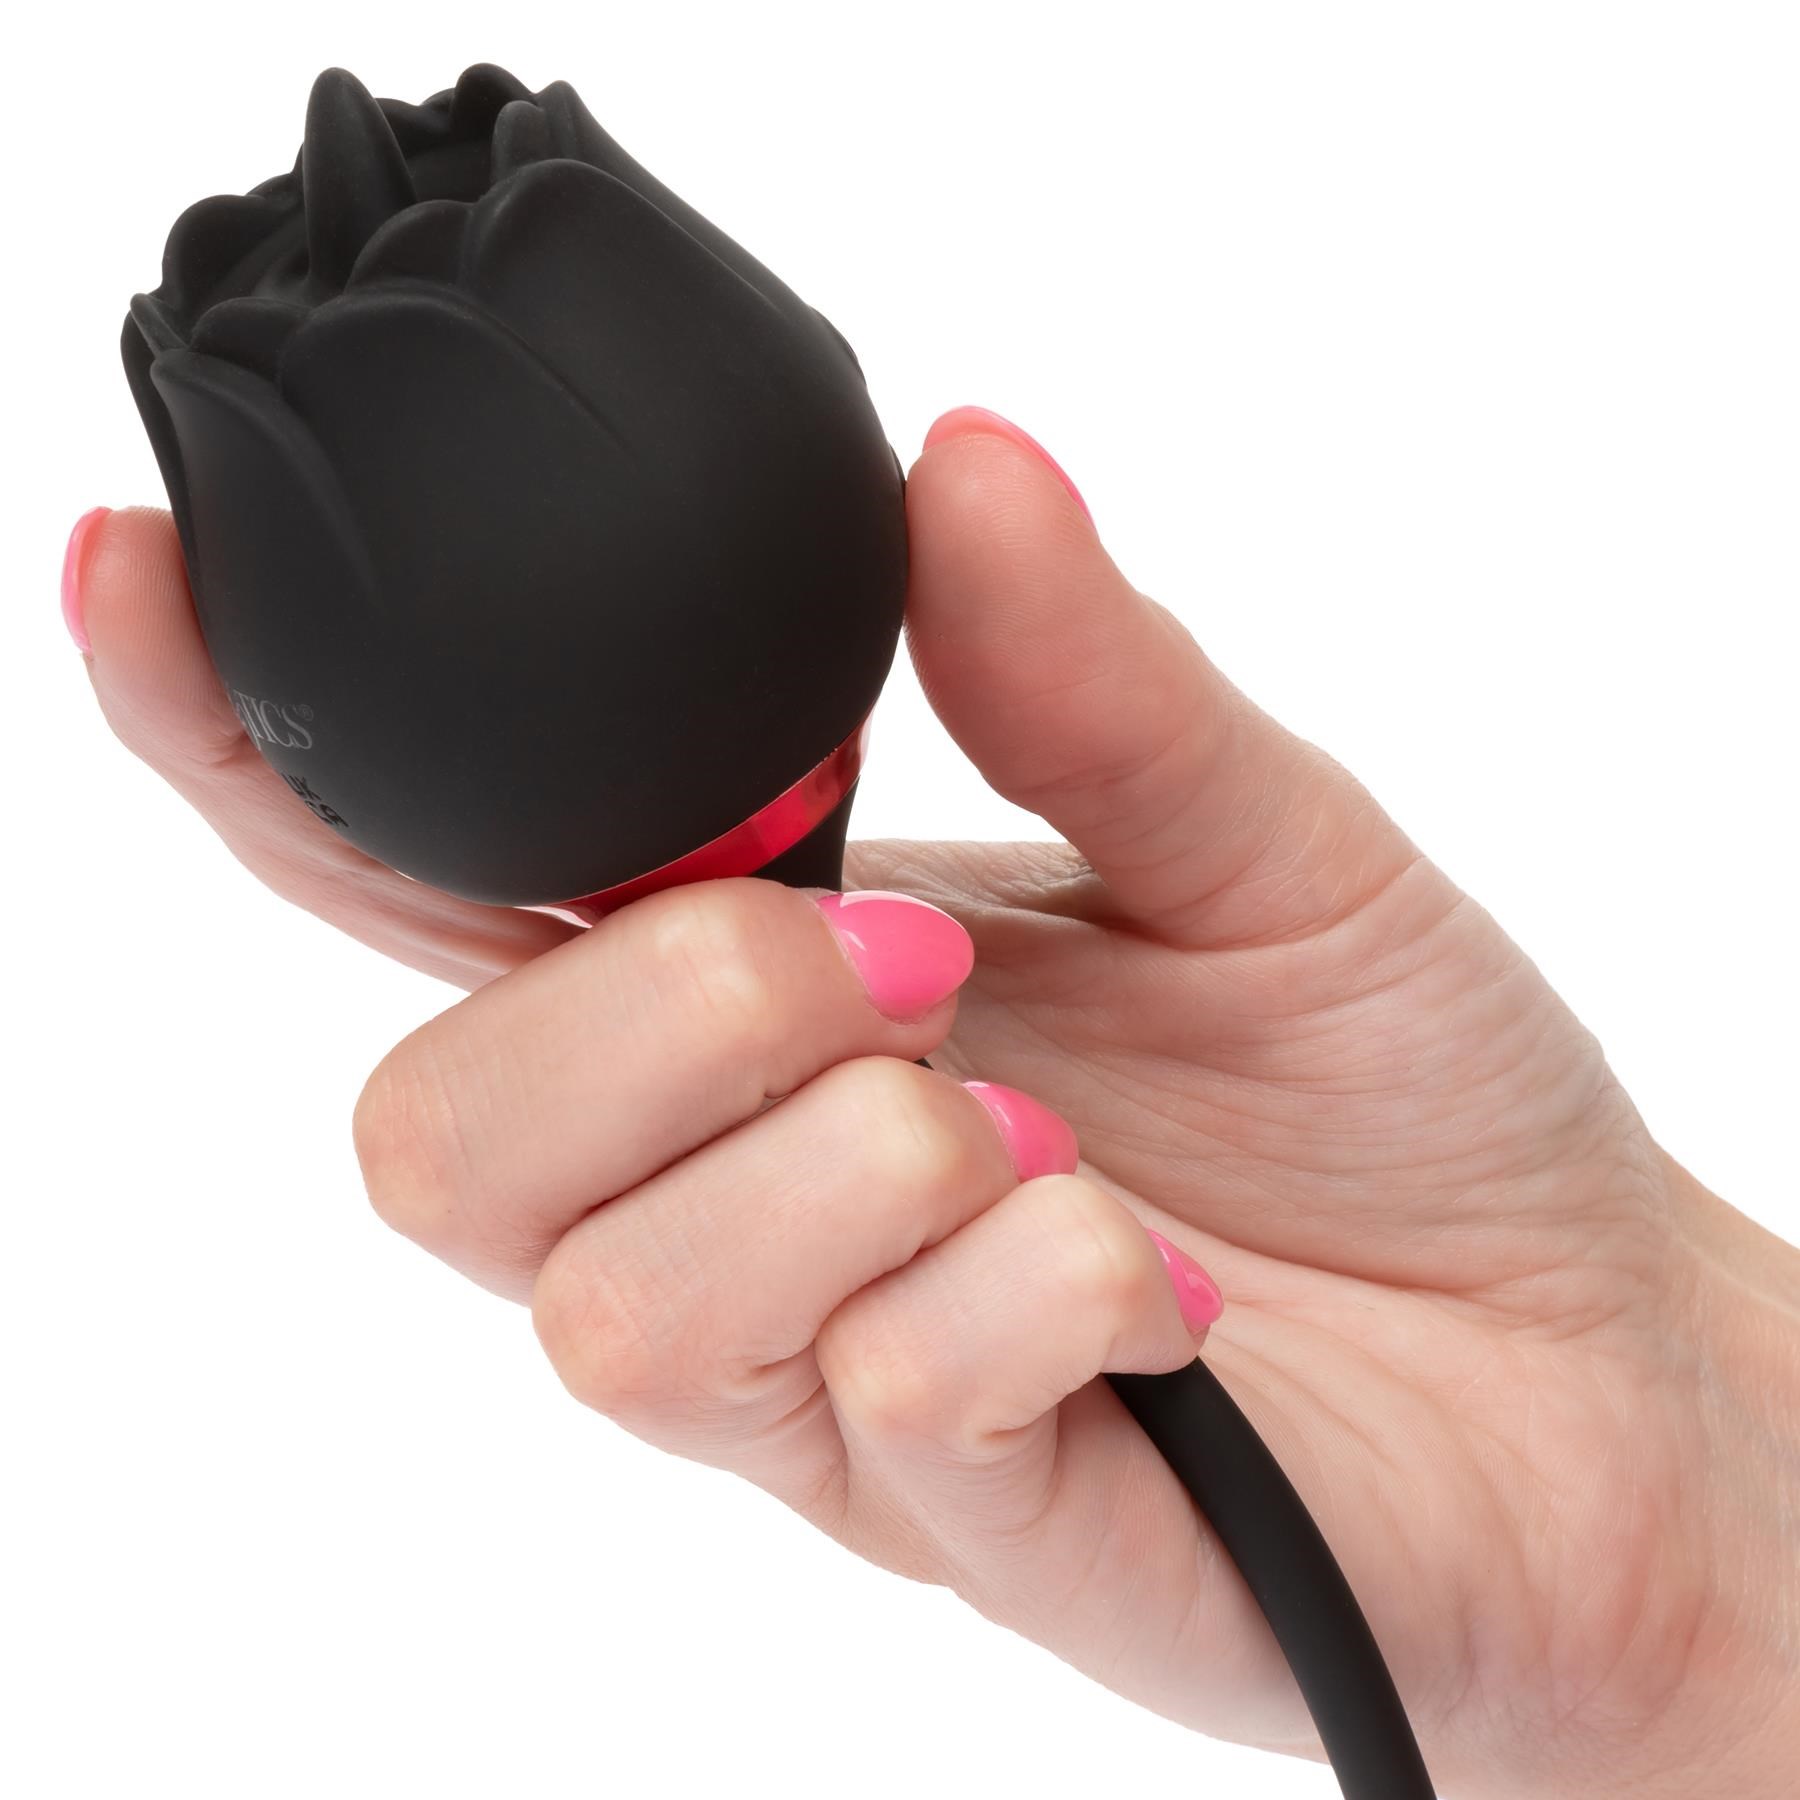 French Kiss Elite Siren Clitorial and Anal Stimulator - Hand Shot - With Rose Tip